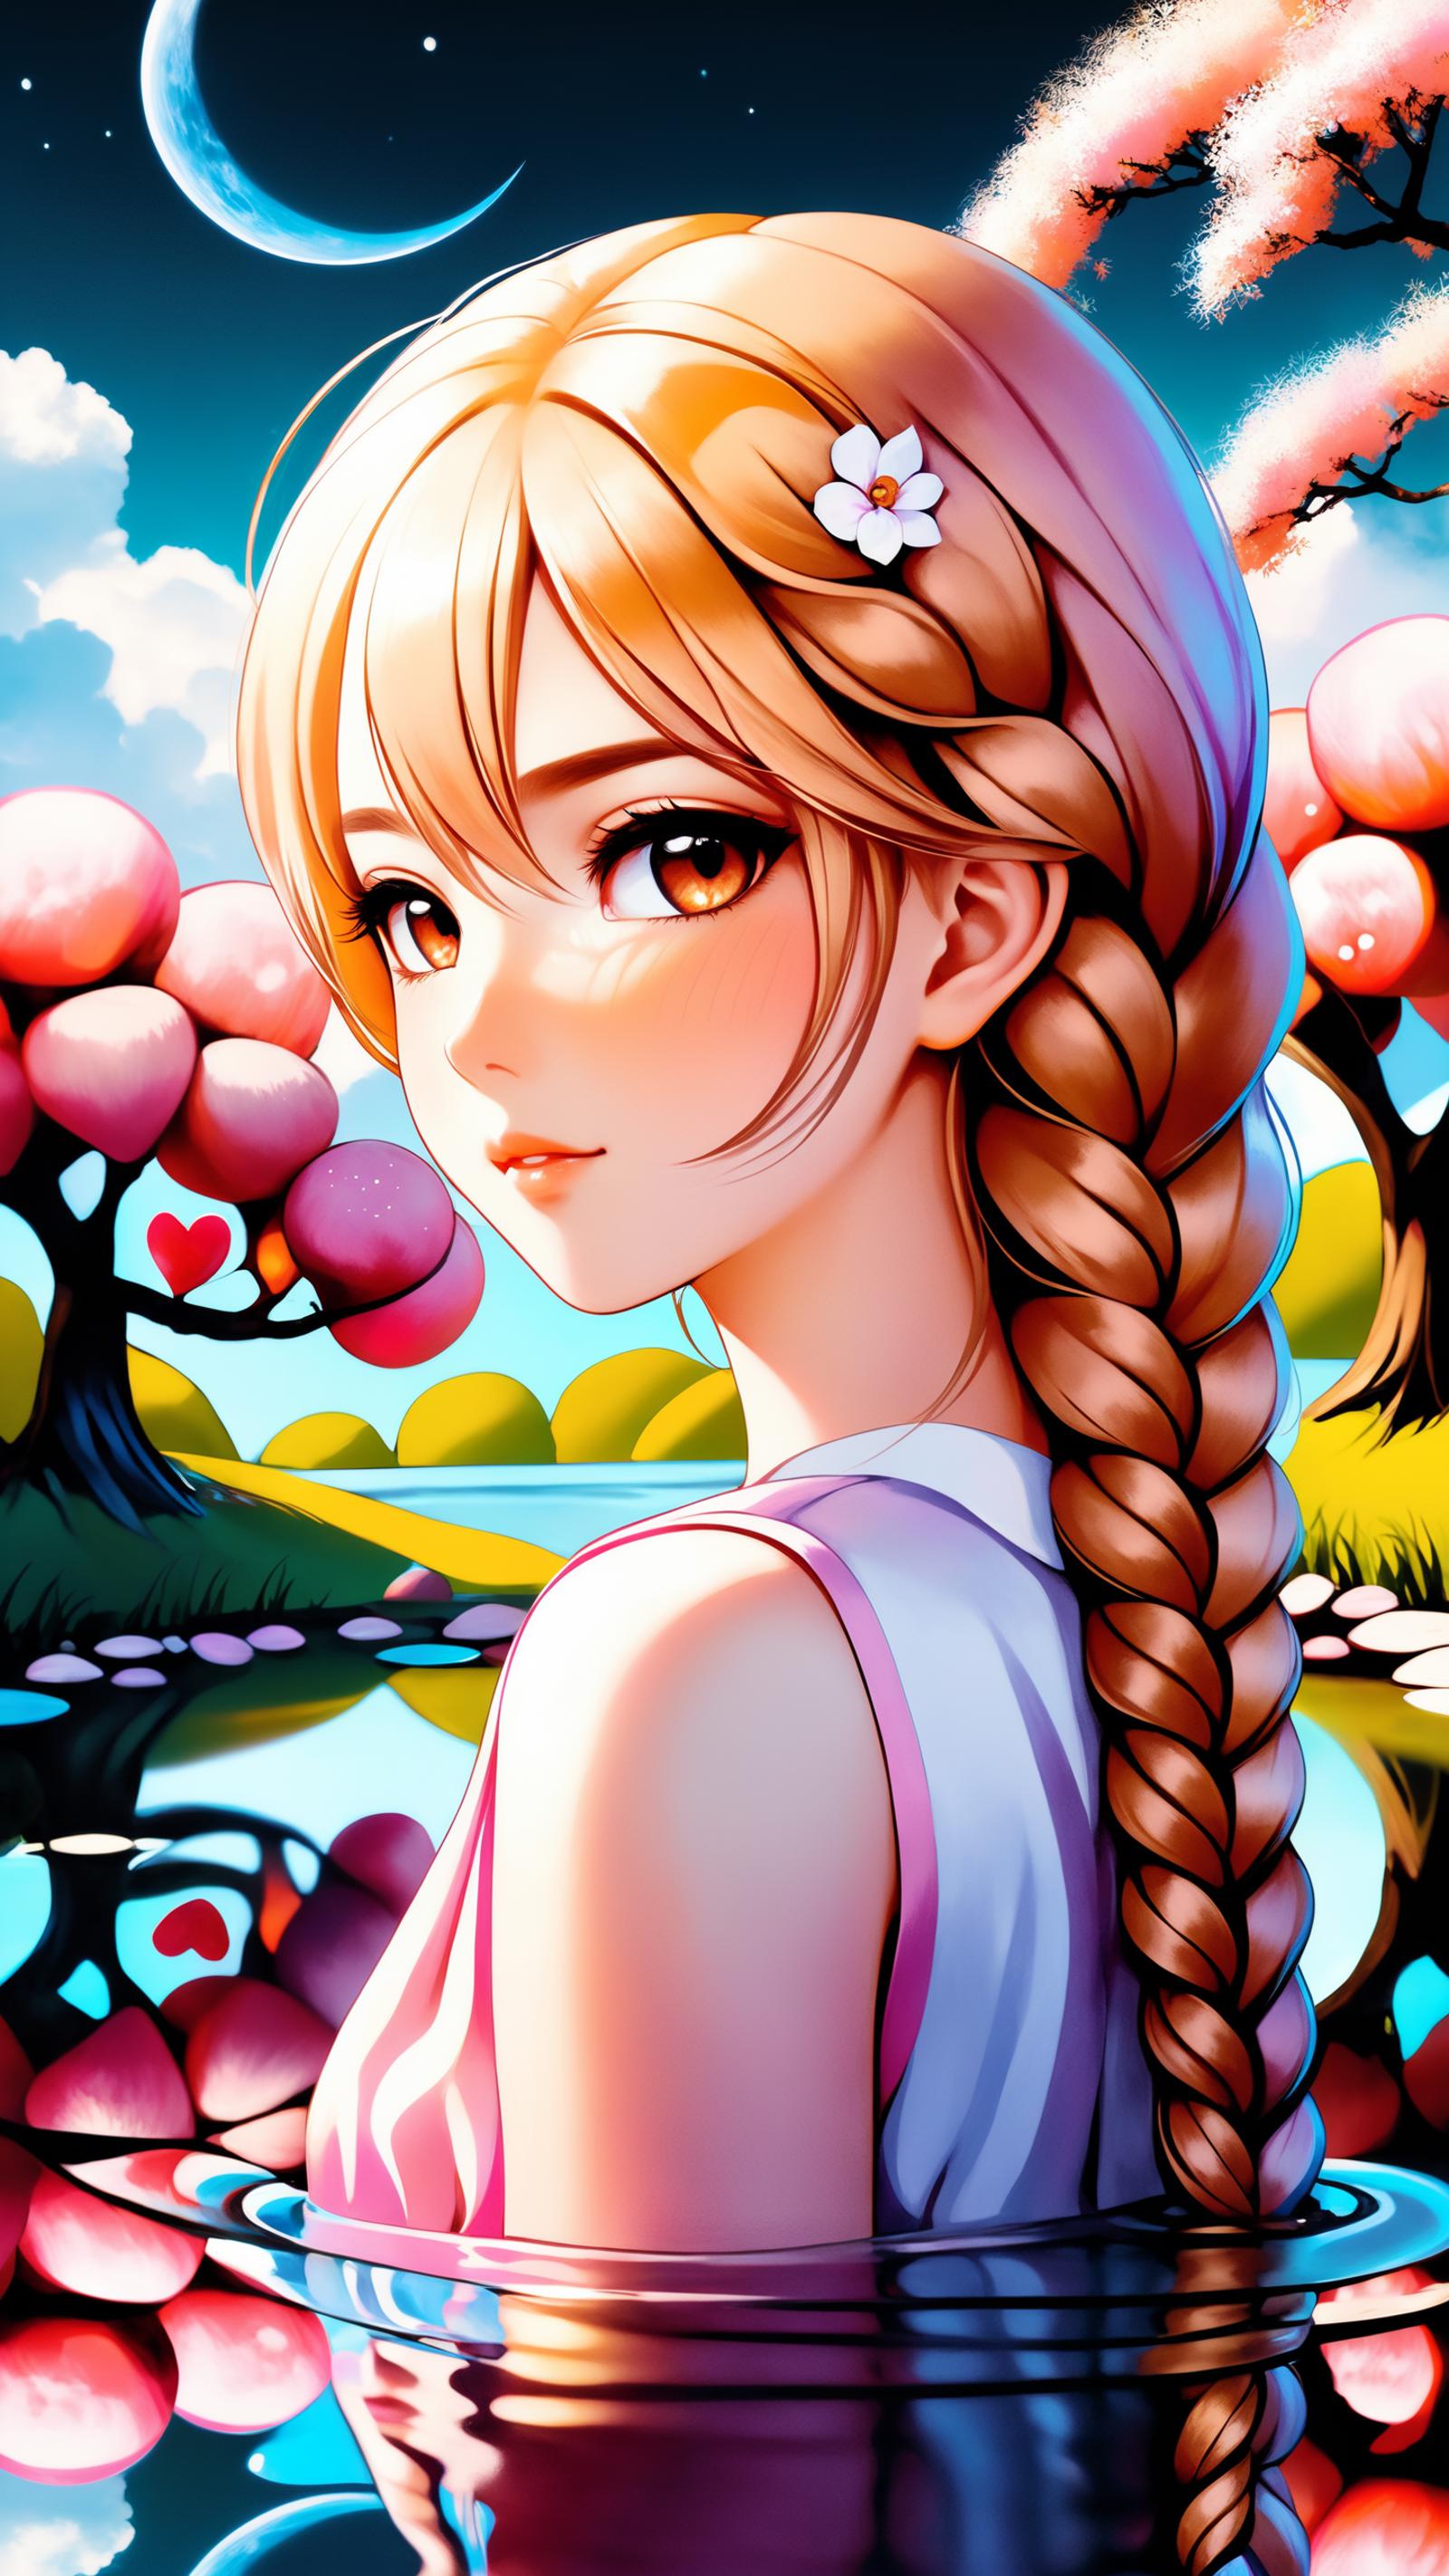 A beautifully drawn illustration of a young girl with long blonde braids, pink cheeks, and a flower in her hair.